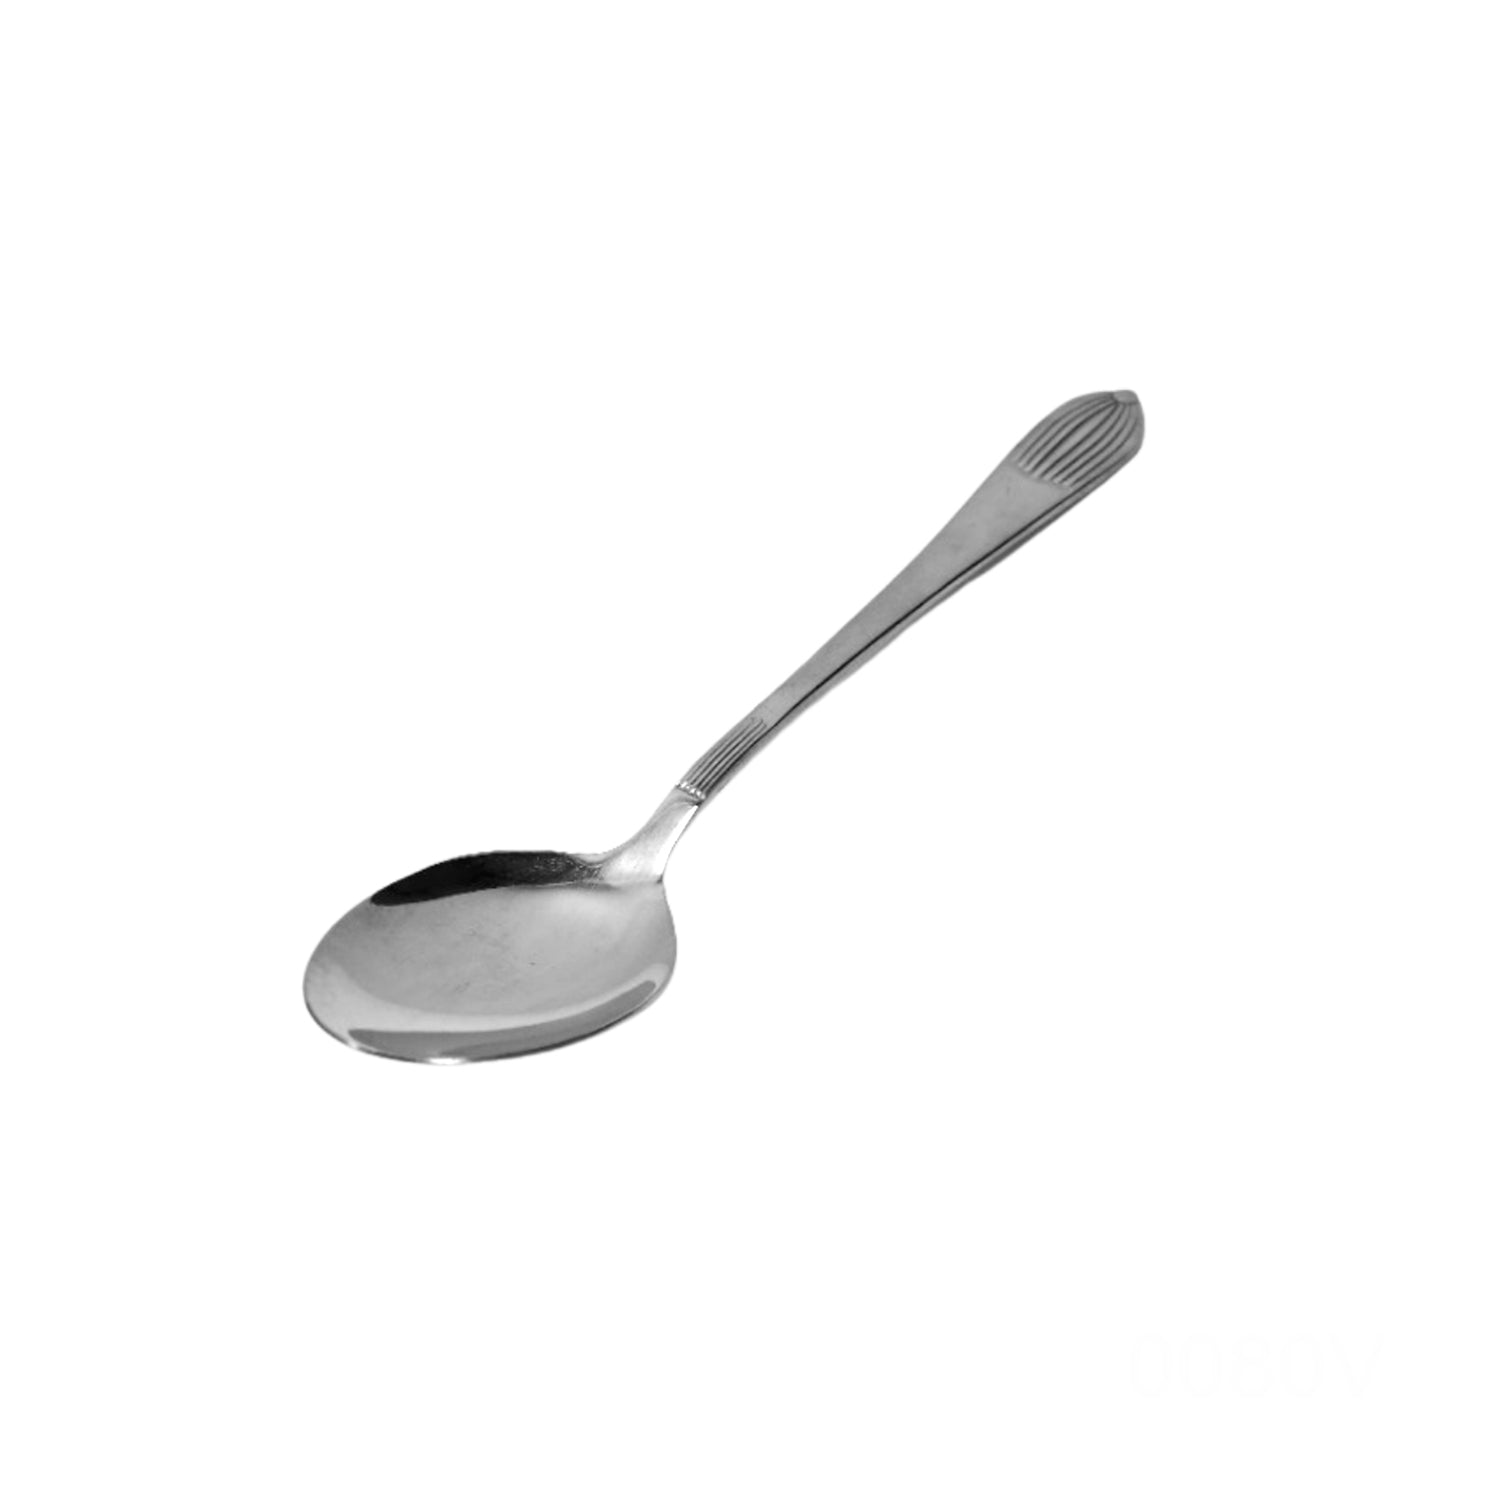 2435 Stainless Steel Spoon 1pc Spoon. Spoon for Coffee, Tea, Sugar, & Spices. DukanDaily